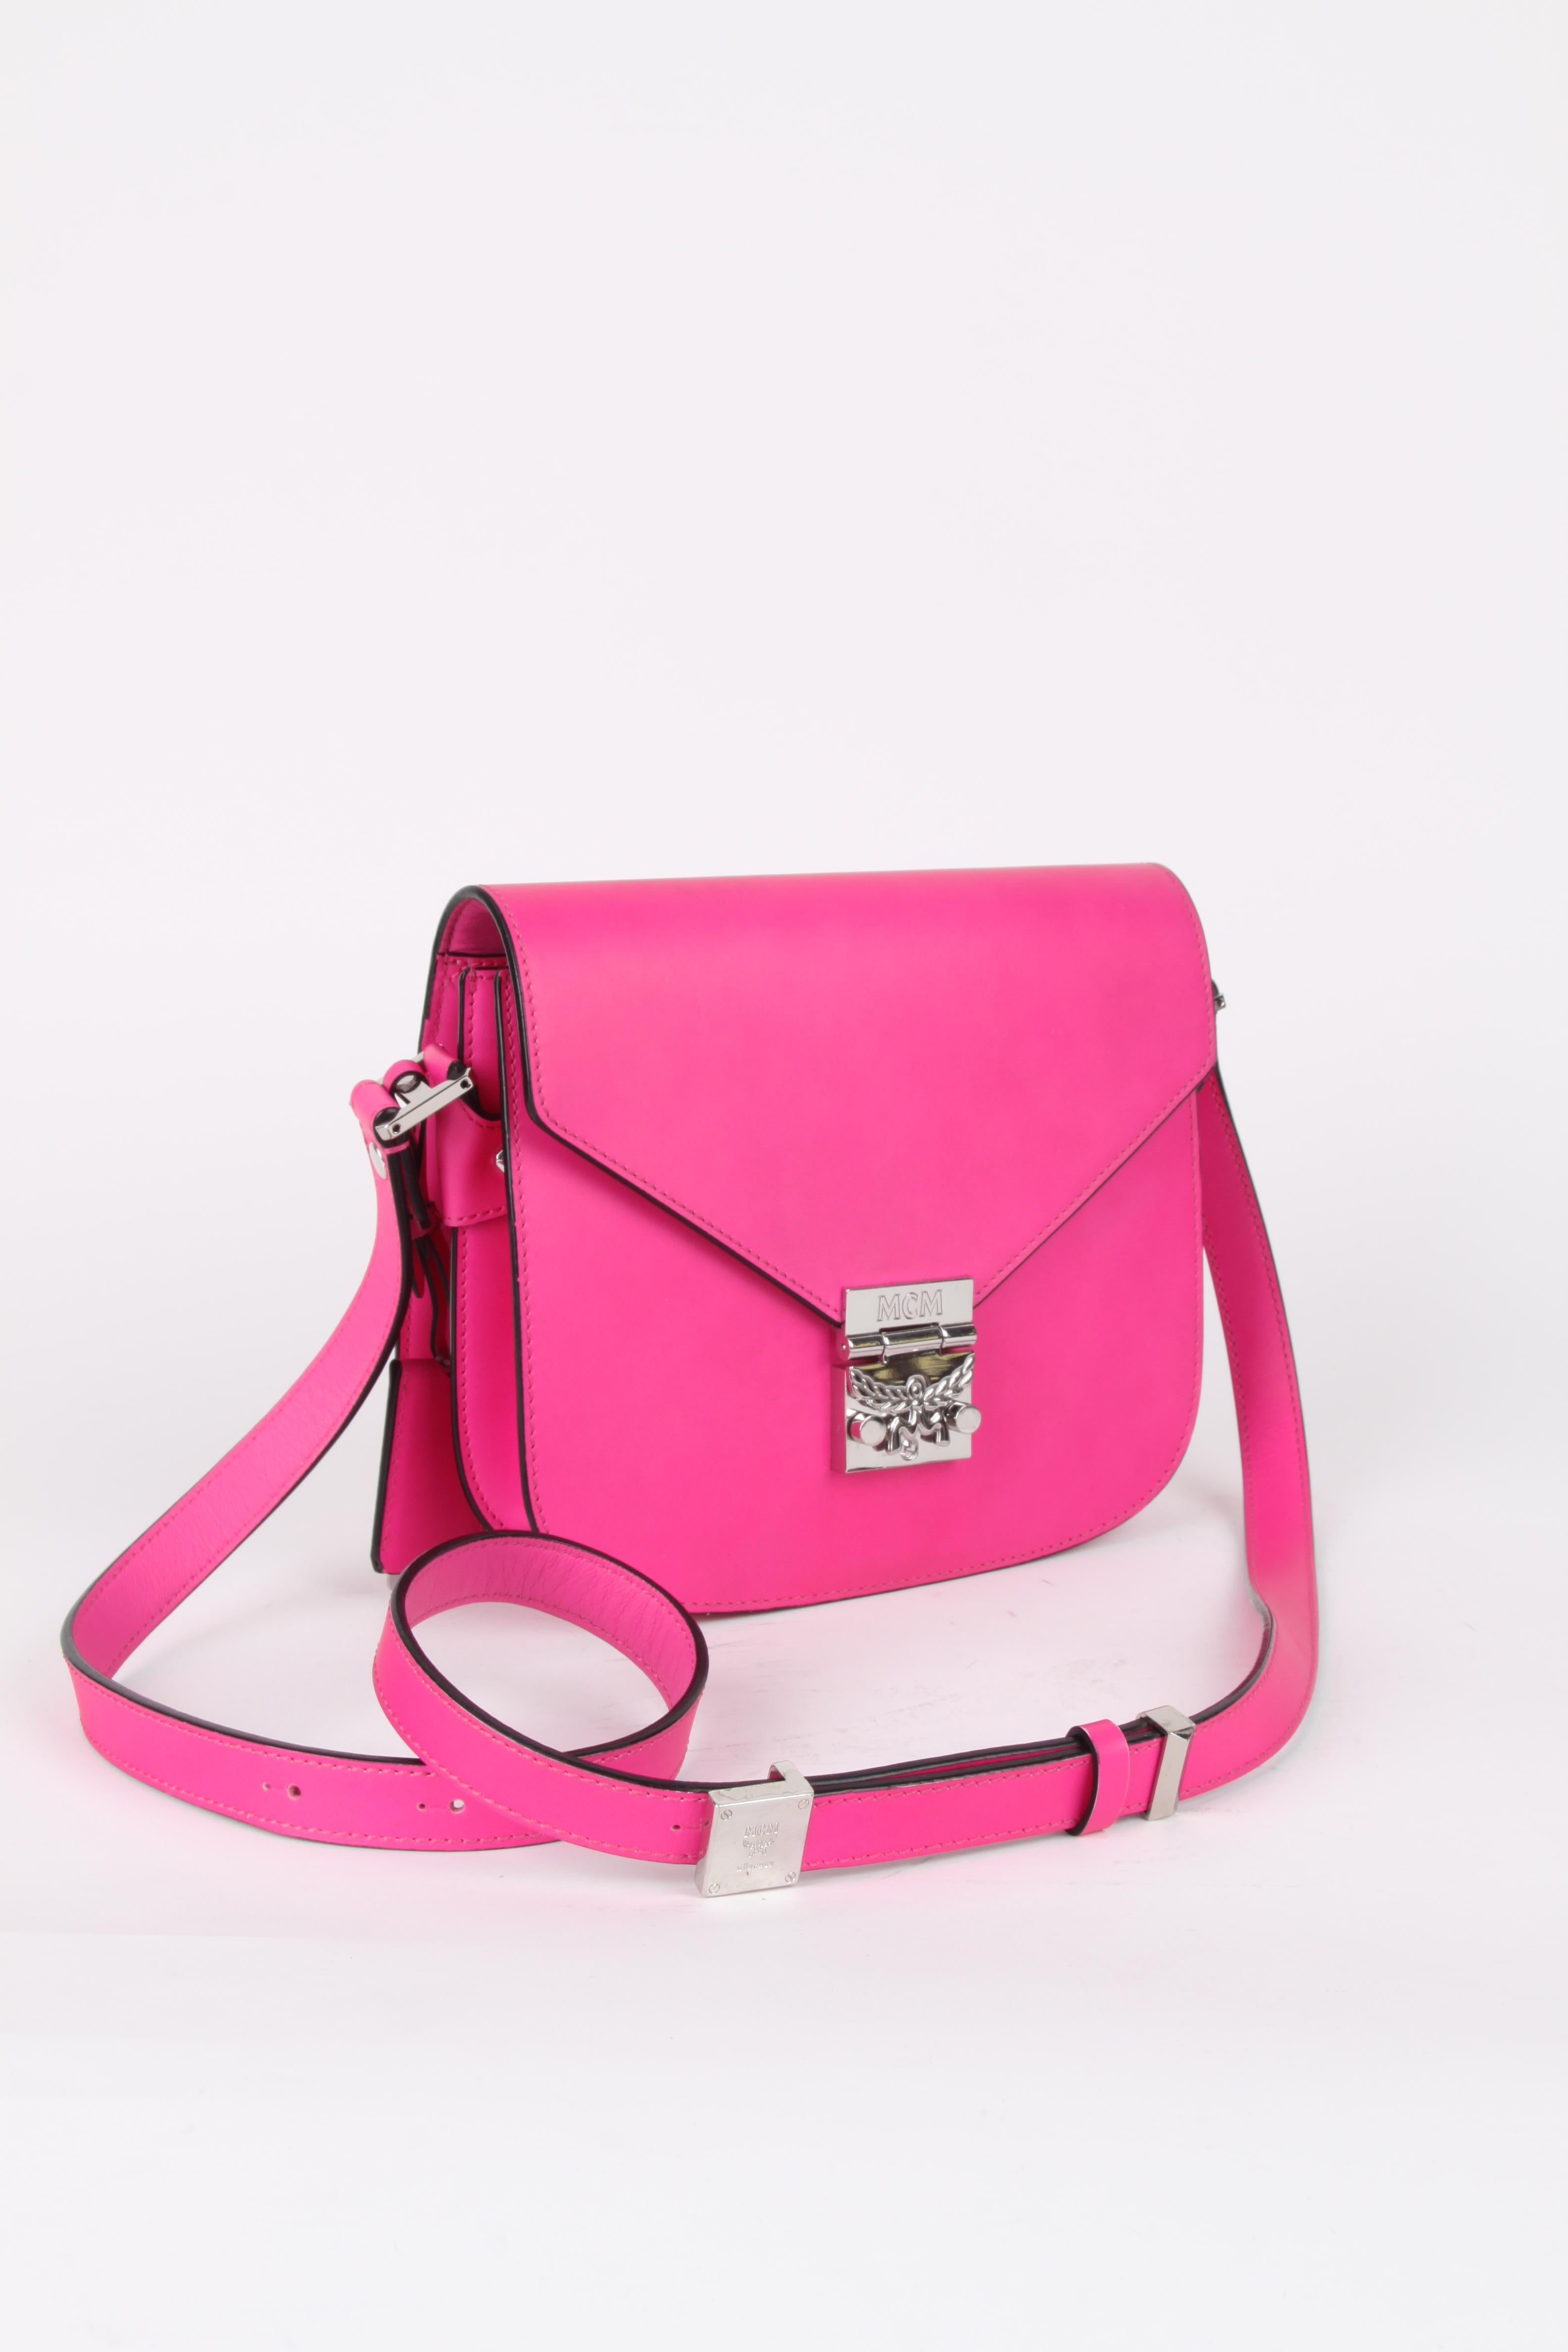 MCM Electric Pink Patricia Calfskin Crossbody Bag For Sale 5